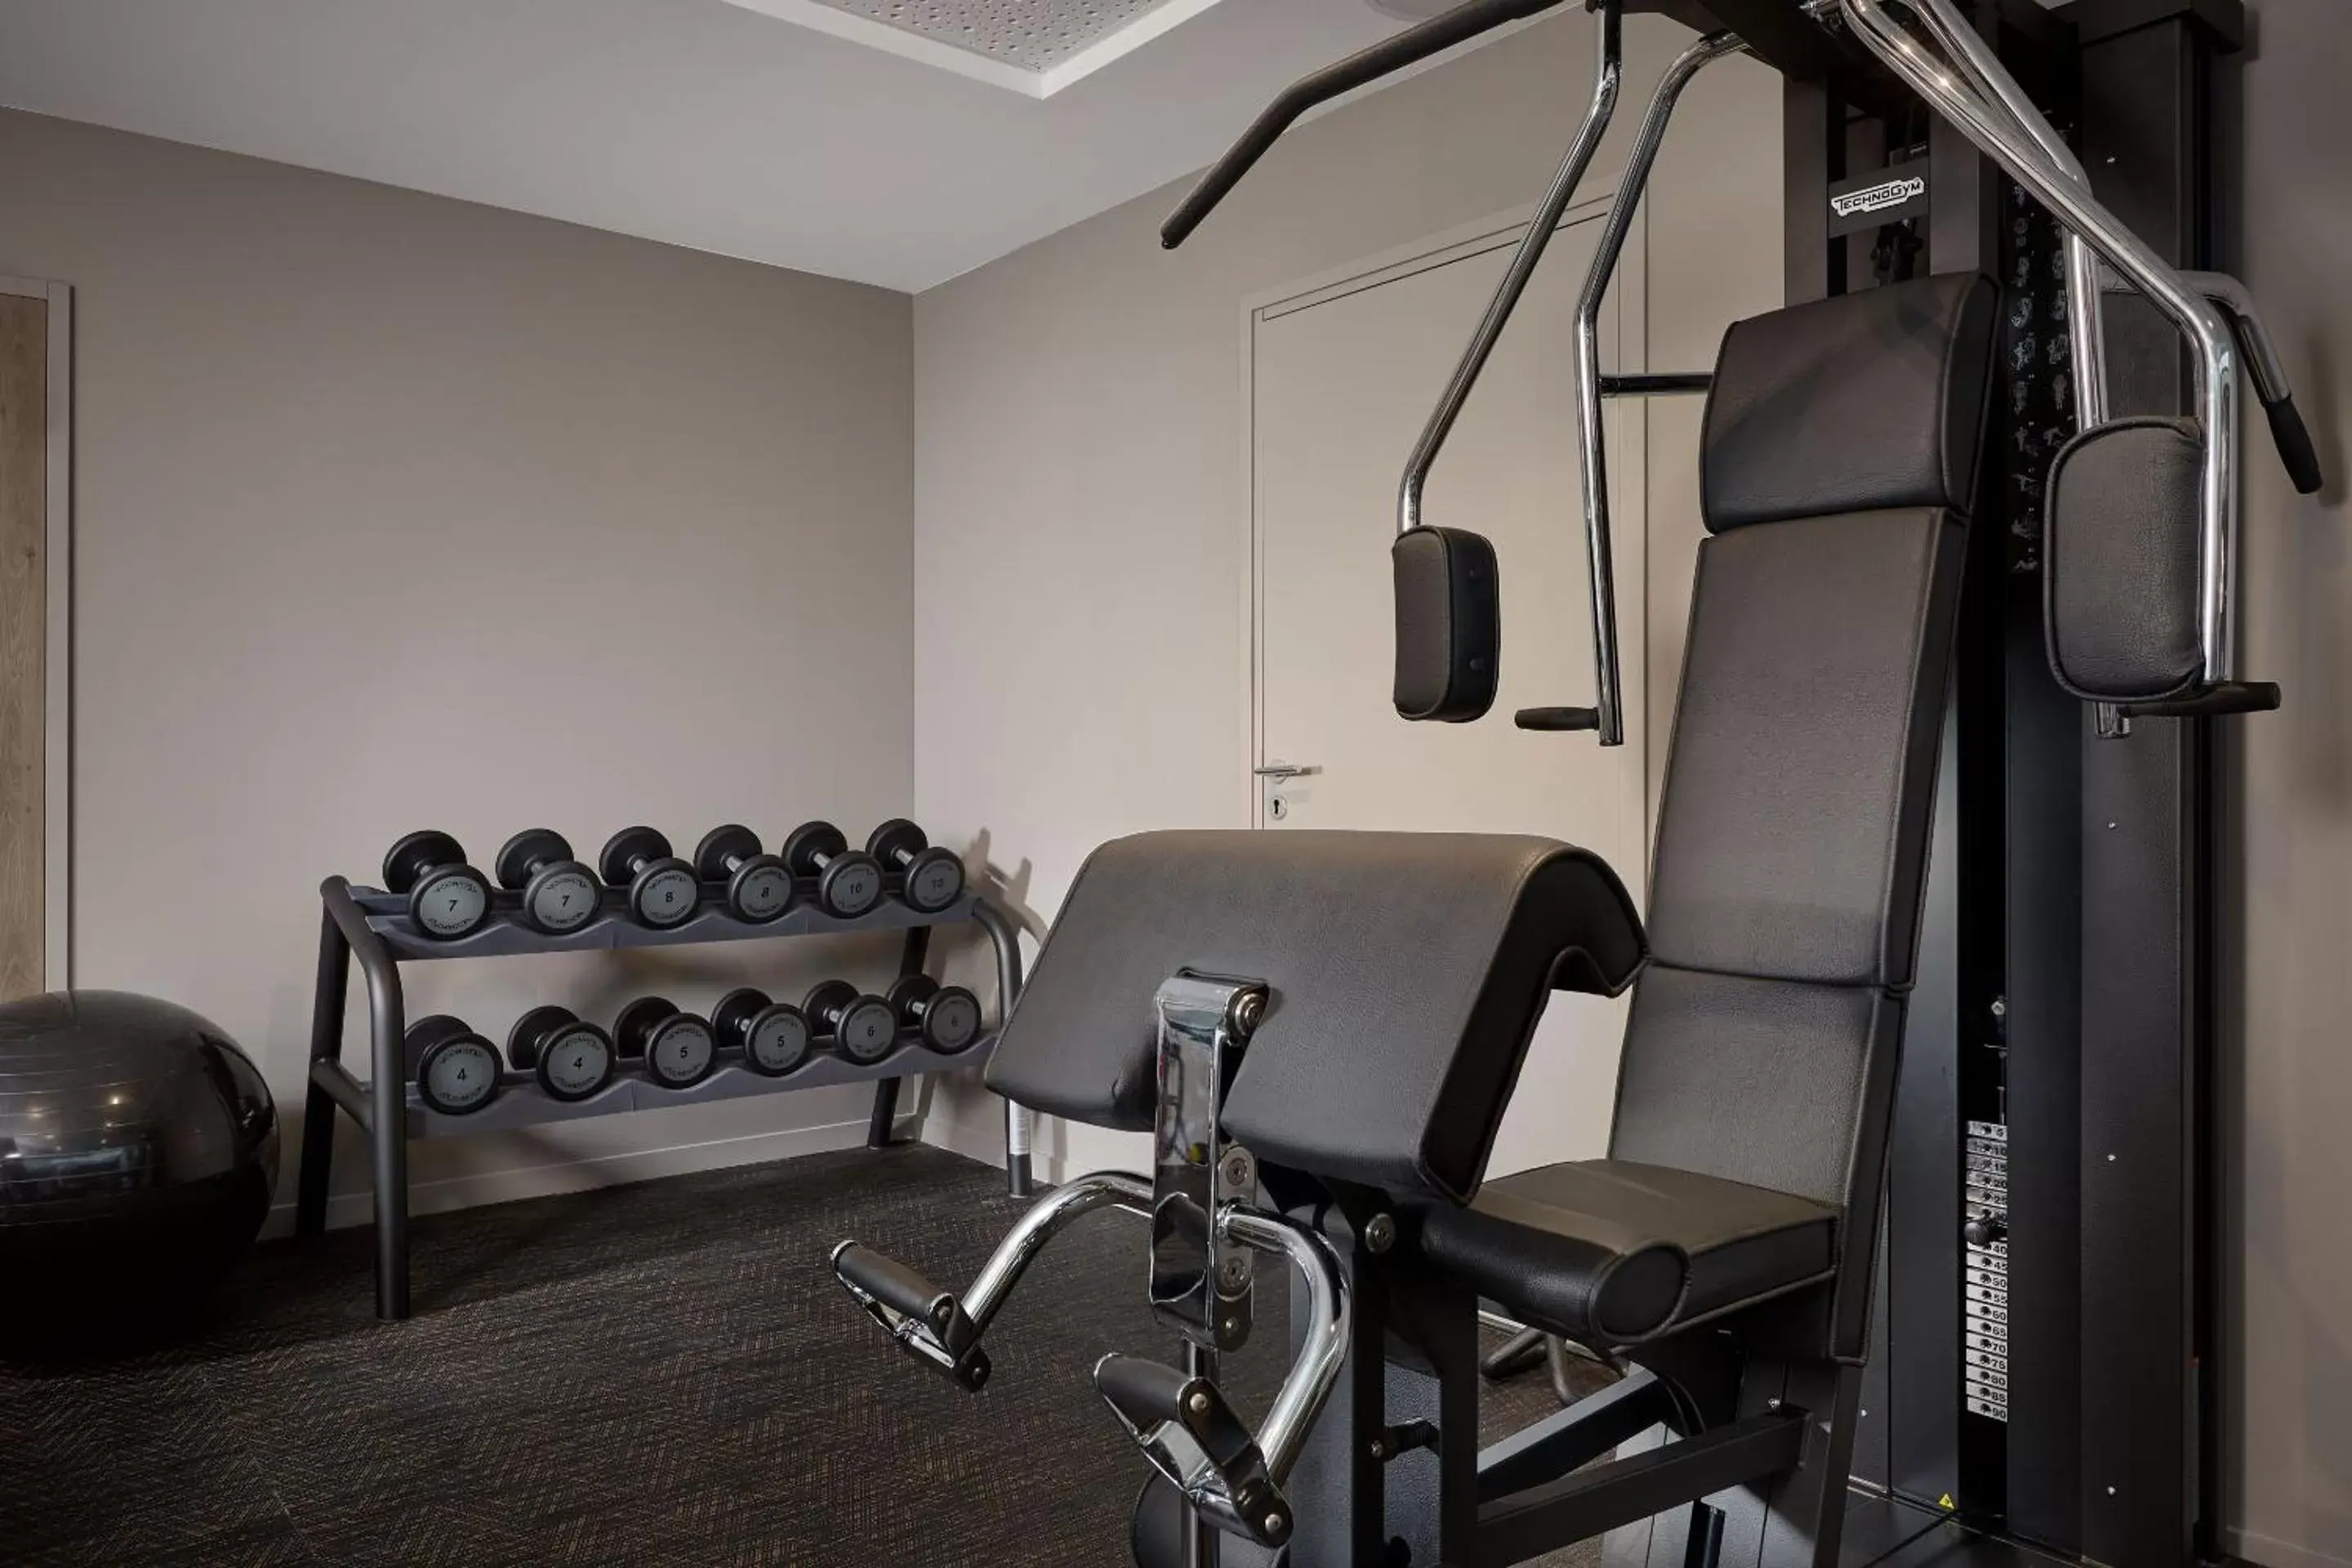 Fitness centre/facilities, Fitness Center/Facilities in Auteuil Tour Eiffel